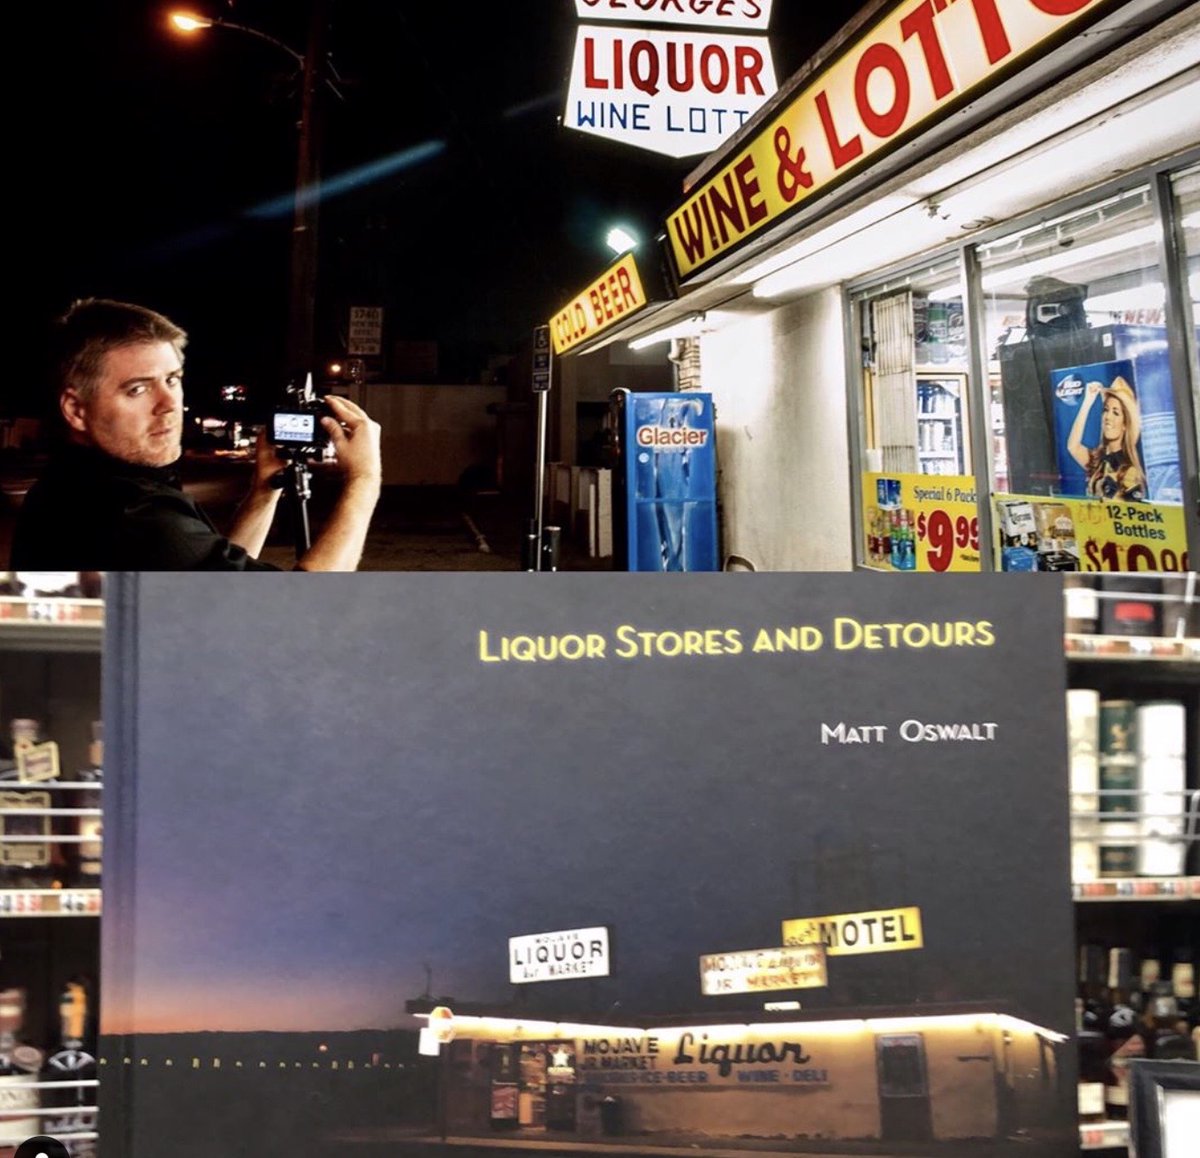 great news, I found one last Liquor Stores & Detours photography book which I'm selling for just $1 million dollars (includes free shipping) Are you a billionaire who needs to launder some money before the fiscal year ends, now's your chance! #BlackFriday MattOswaltPhoto.com